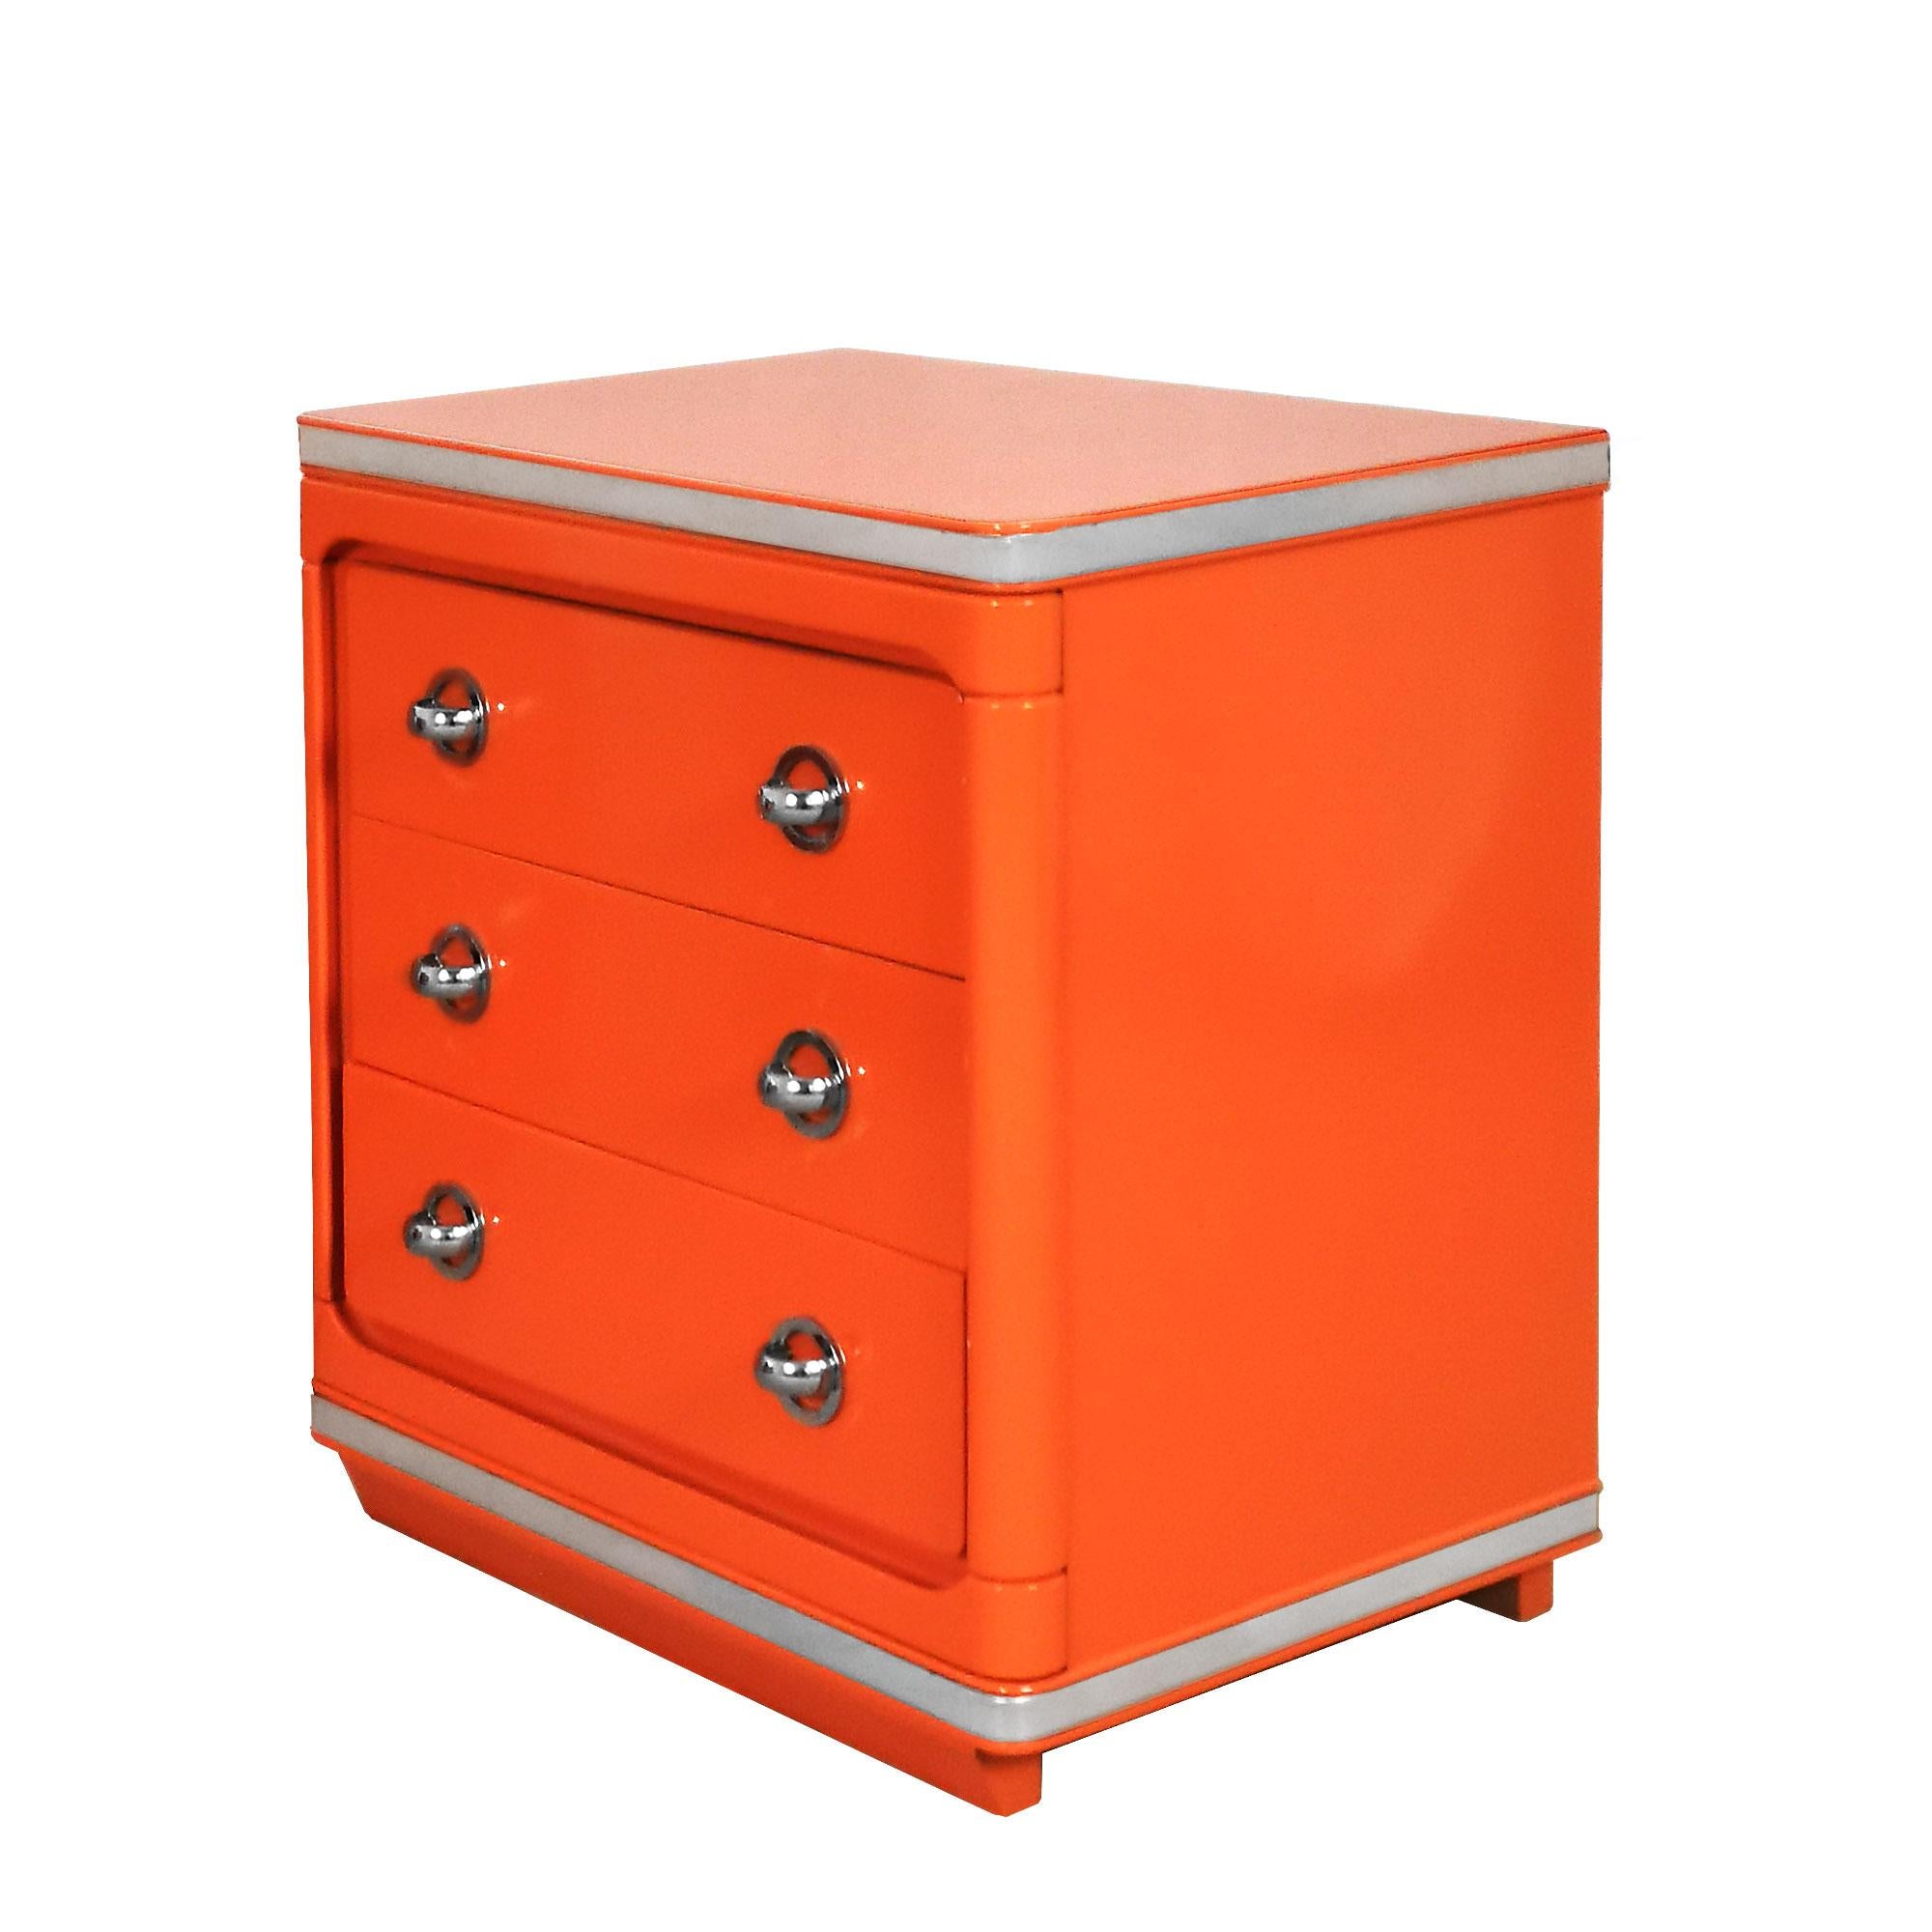 Pair of night stands, orange lacquered solid wood, three drawers, chrome plated metal handles and decorations.

Spain, Barcelona c. 1970.